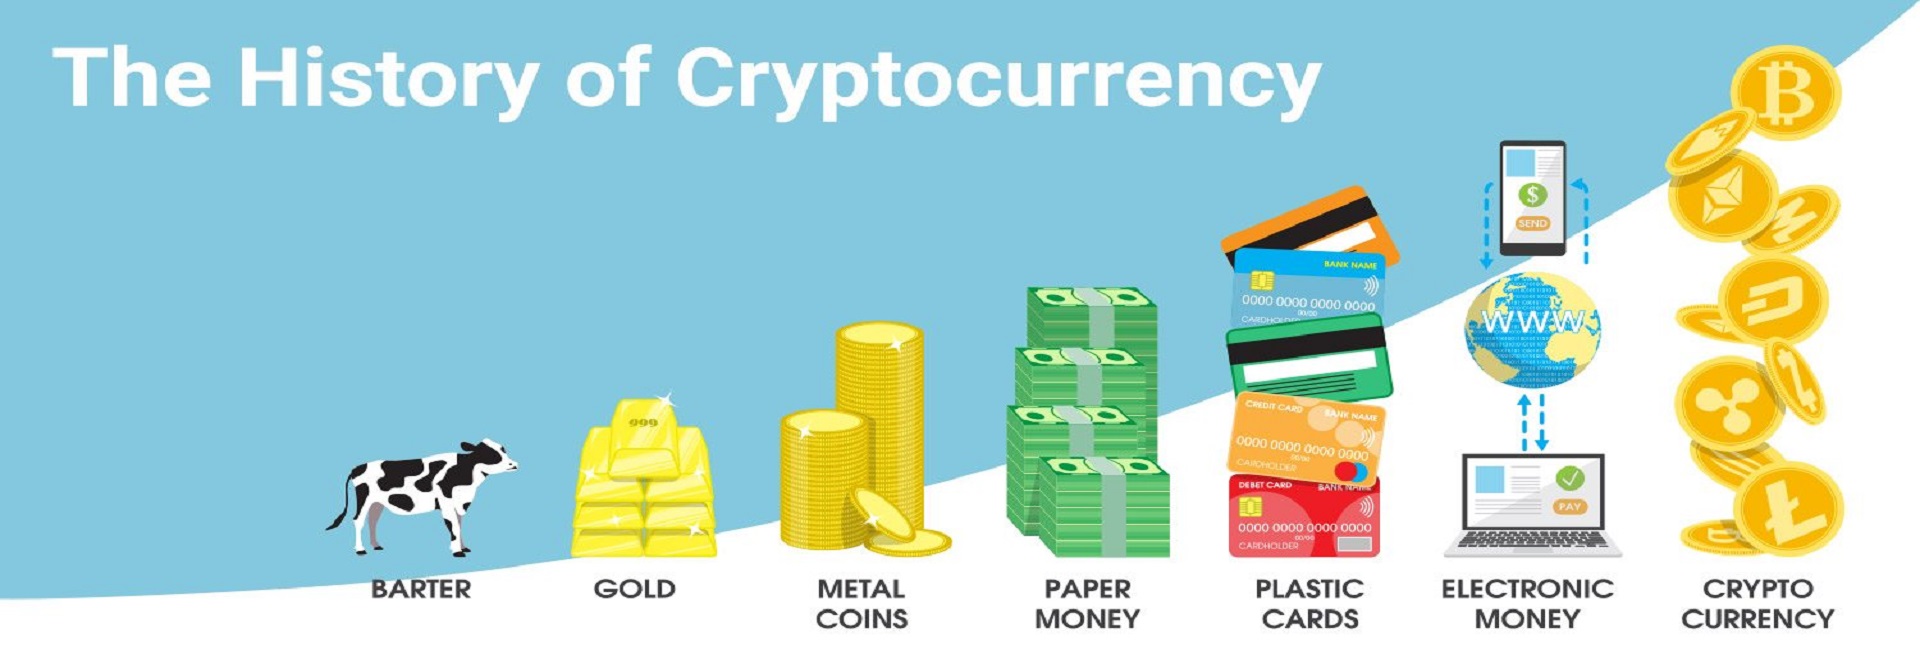 The History of Cryptocurrency - صفحه اصلی